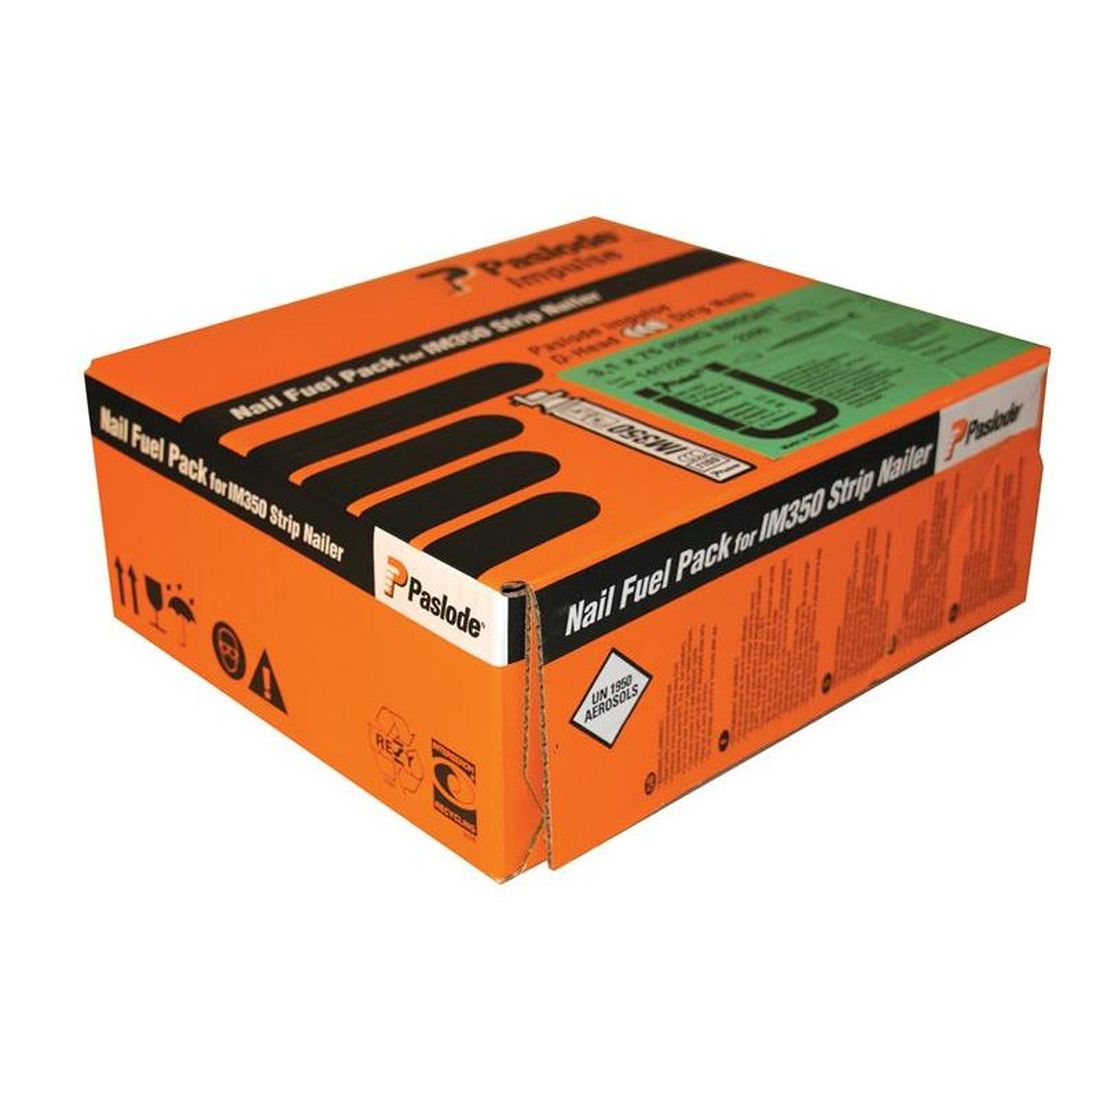 Paslode IM360Ci 90mm Smooth Bright Framing Nails Fuel Pack €61.00